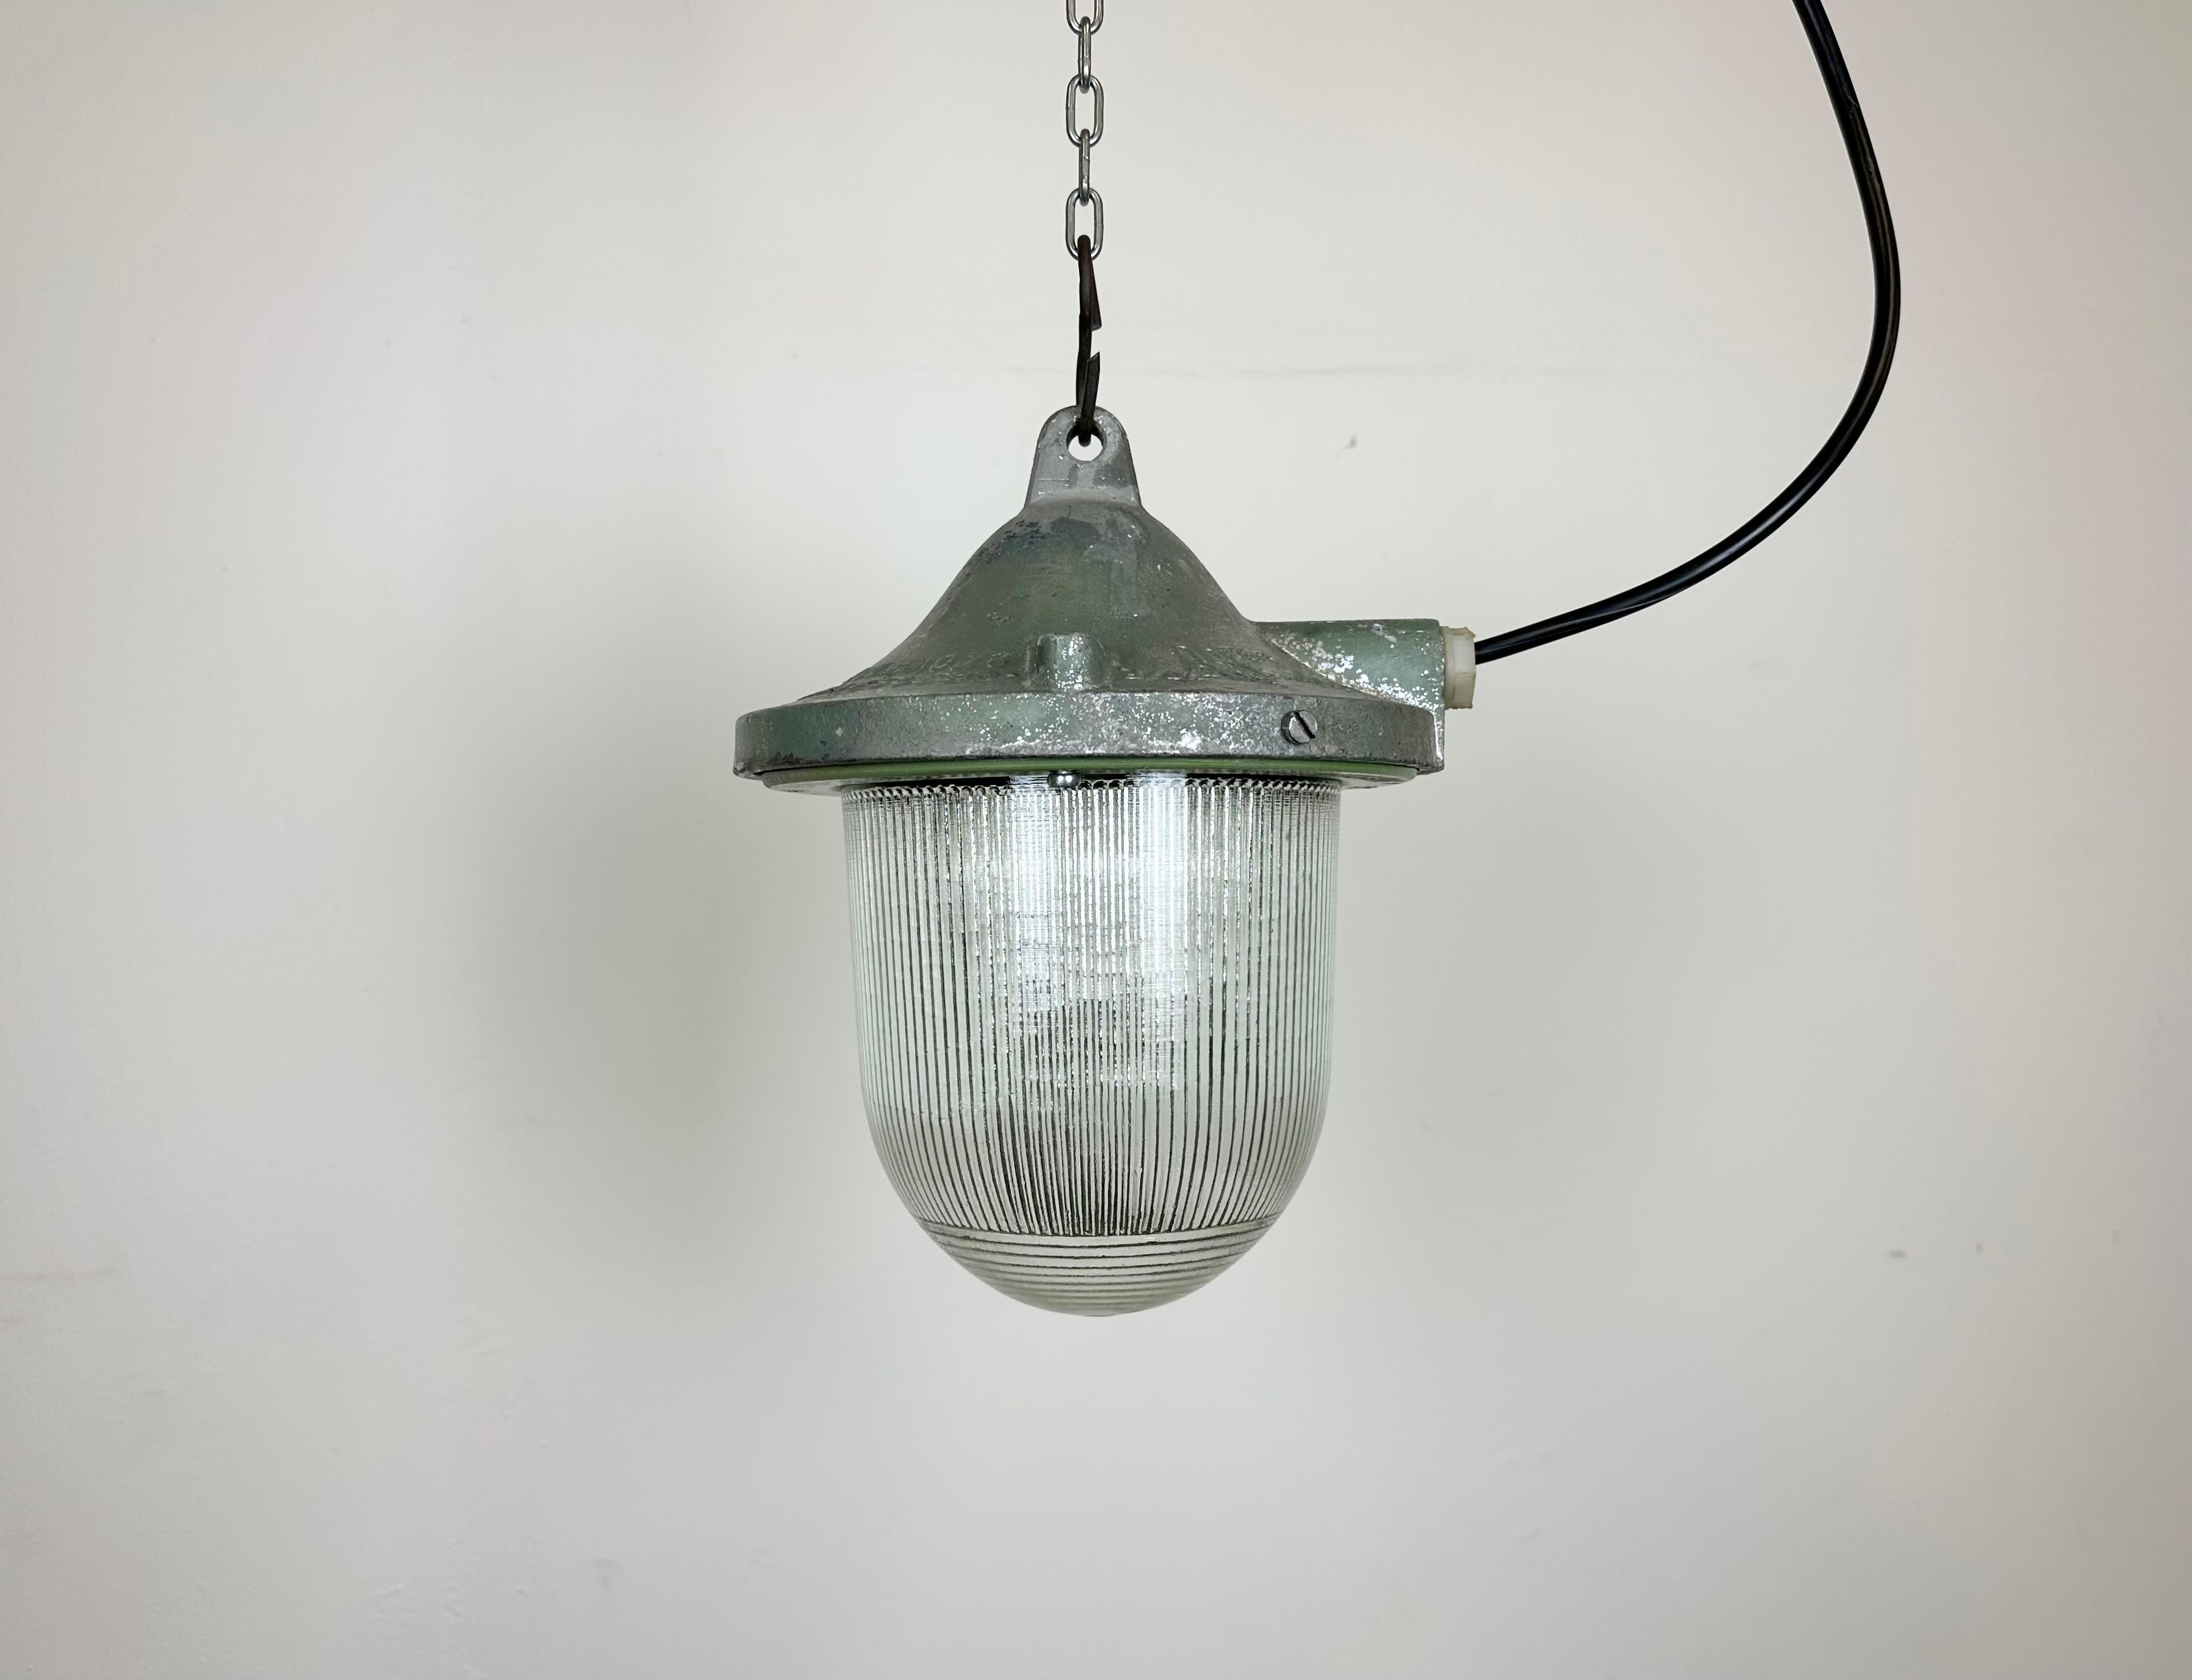 Green industrial lamp made by Polam Gdansk in Poland during the 1960s. It features a cast aluminium body and a striped glass. The porcelain socket requires E 27/ E 26 lightbulbs. New wire. The weight of the lamp is 2.5 kg.